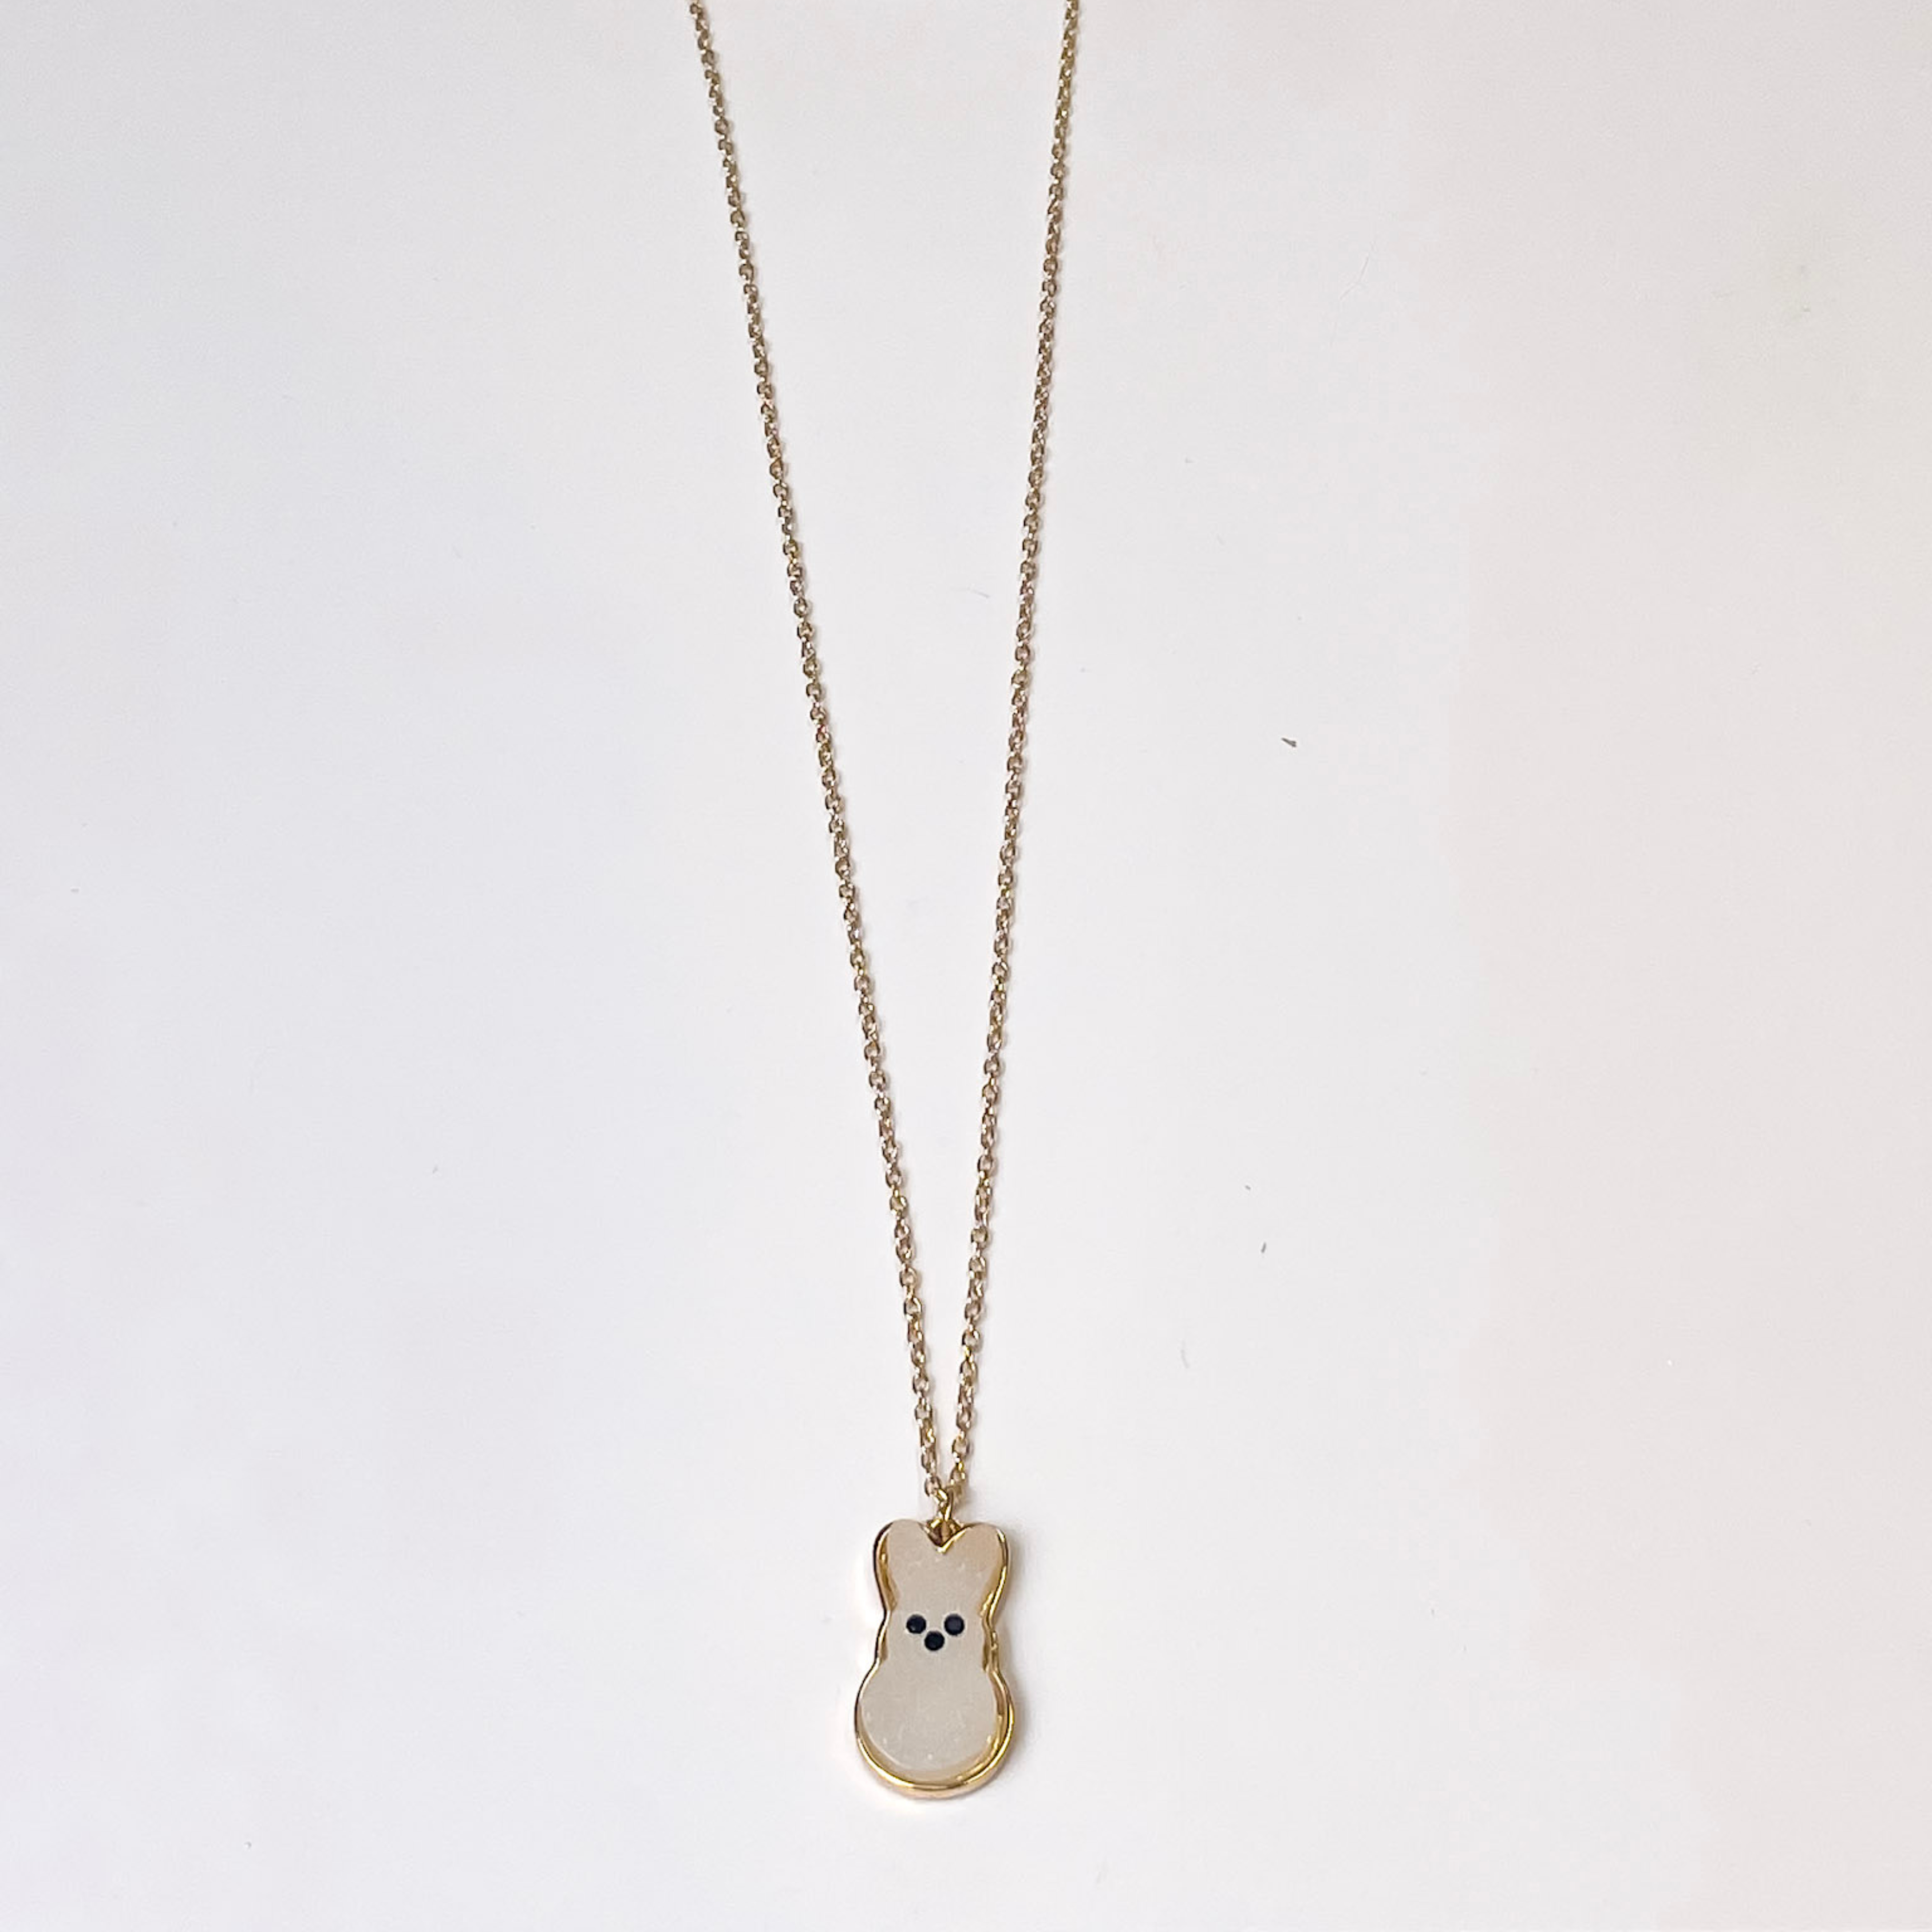 Gold Chain Necklace with Bunny Pendant in White - Giddy Up Glamour Boutique